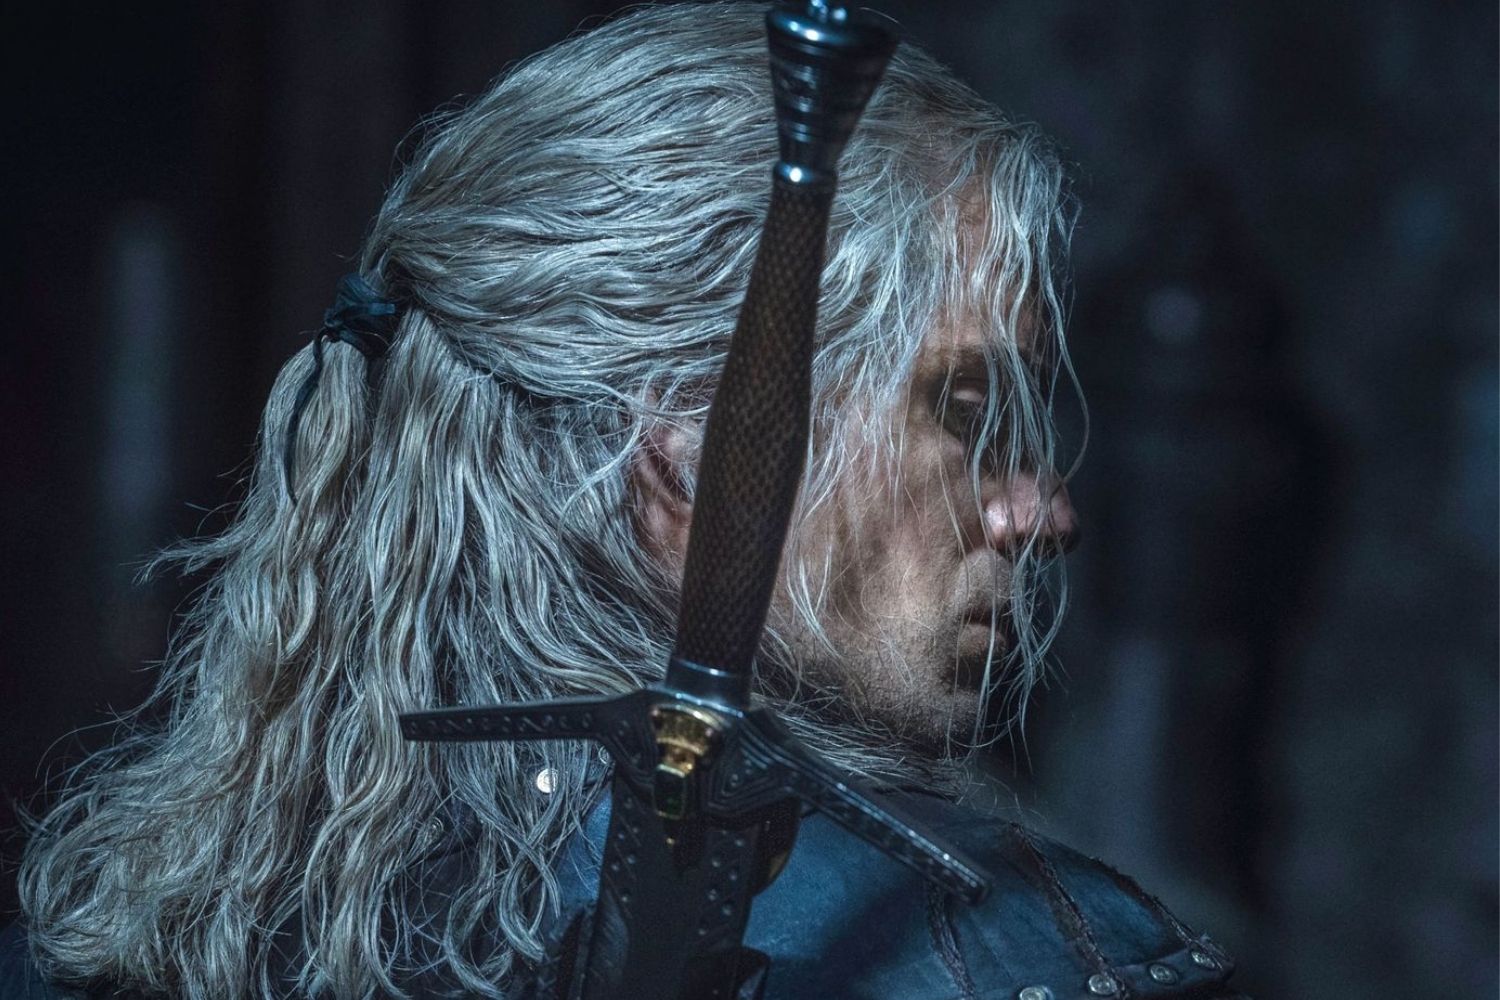 All the ways you can watch ‘The Witcher’ season 2 online for free